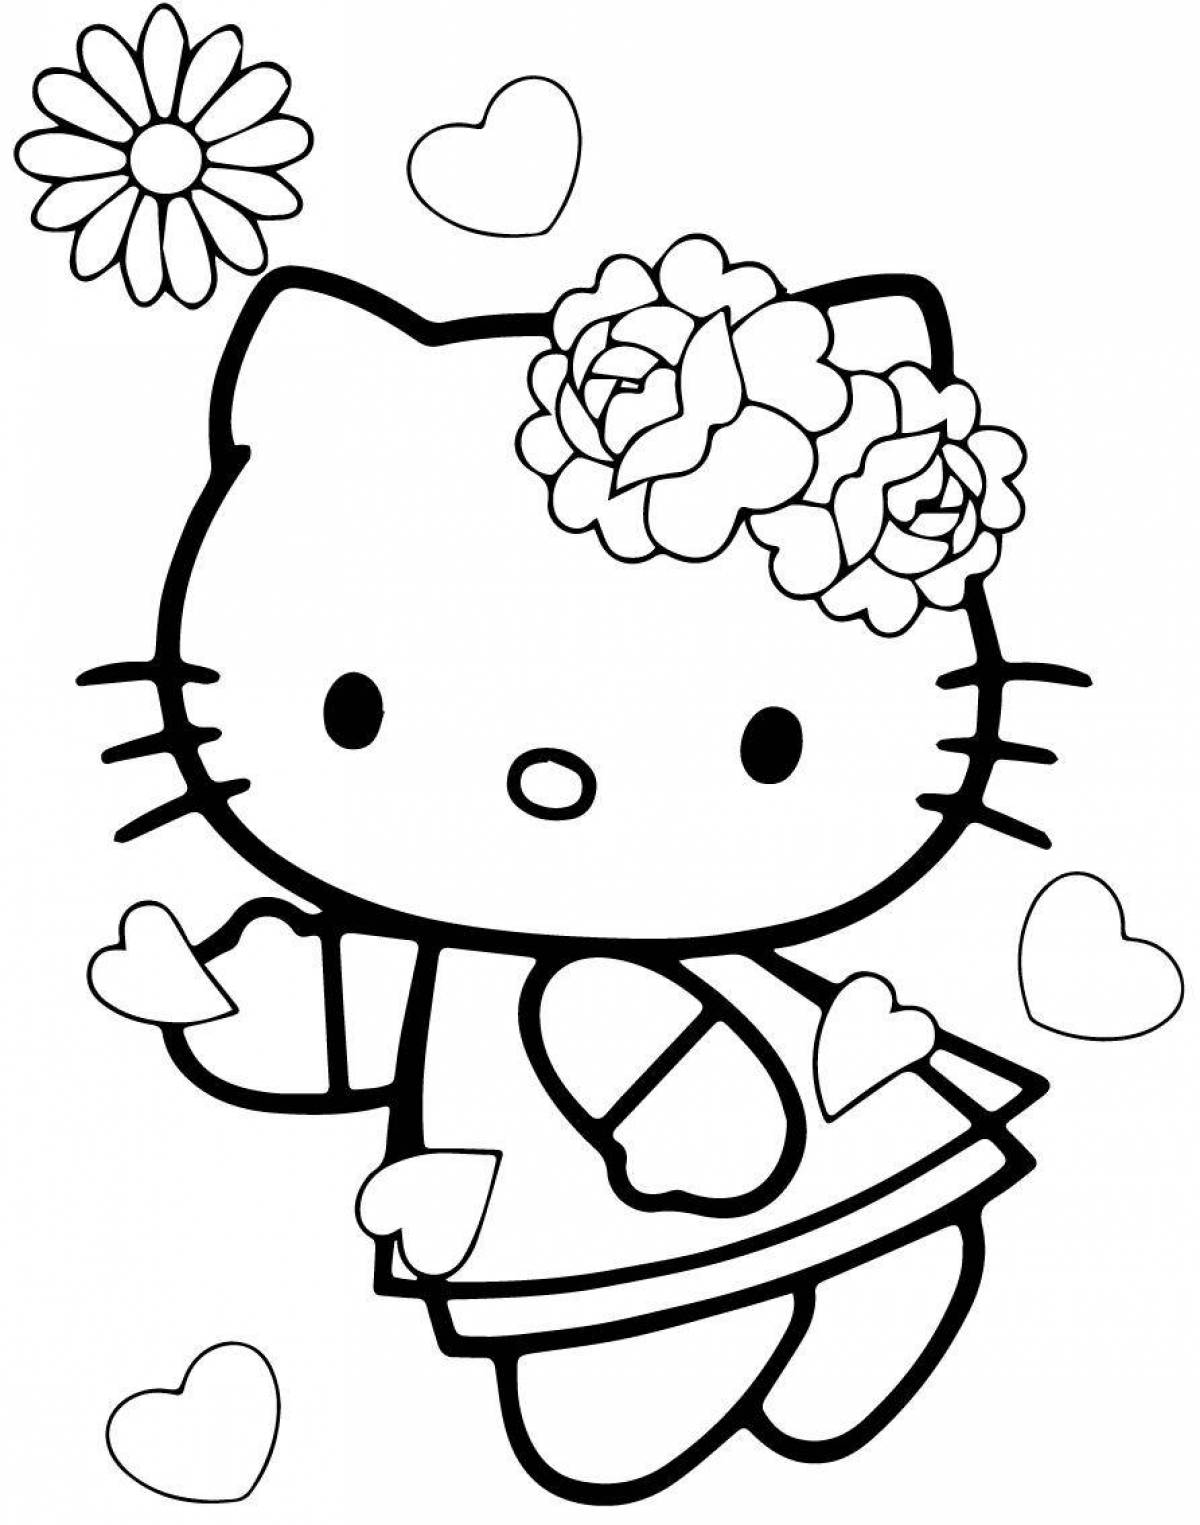 Fancy hello kitty coloring